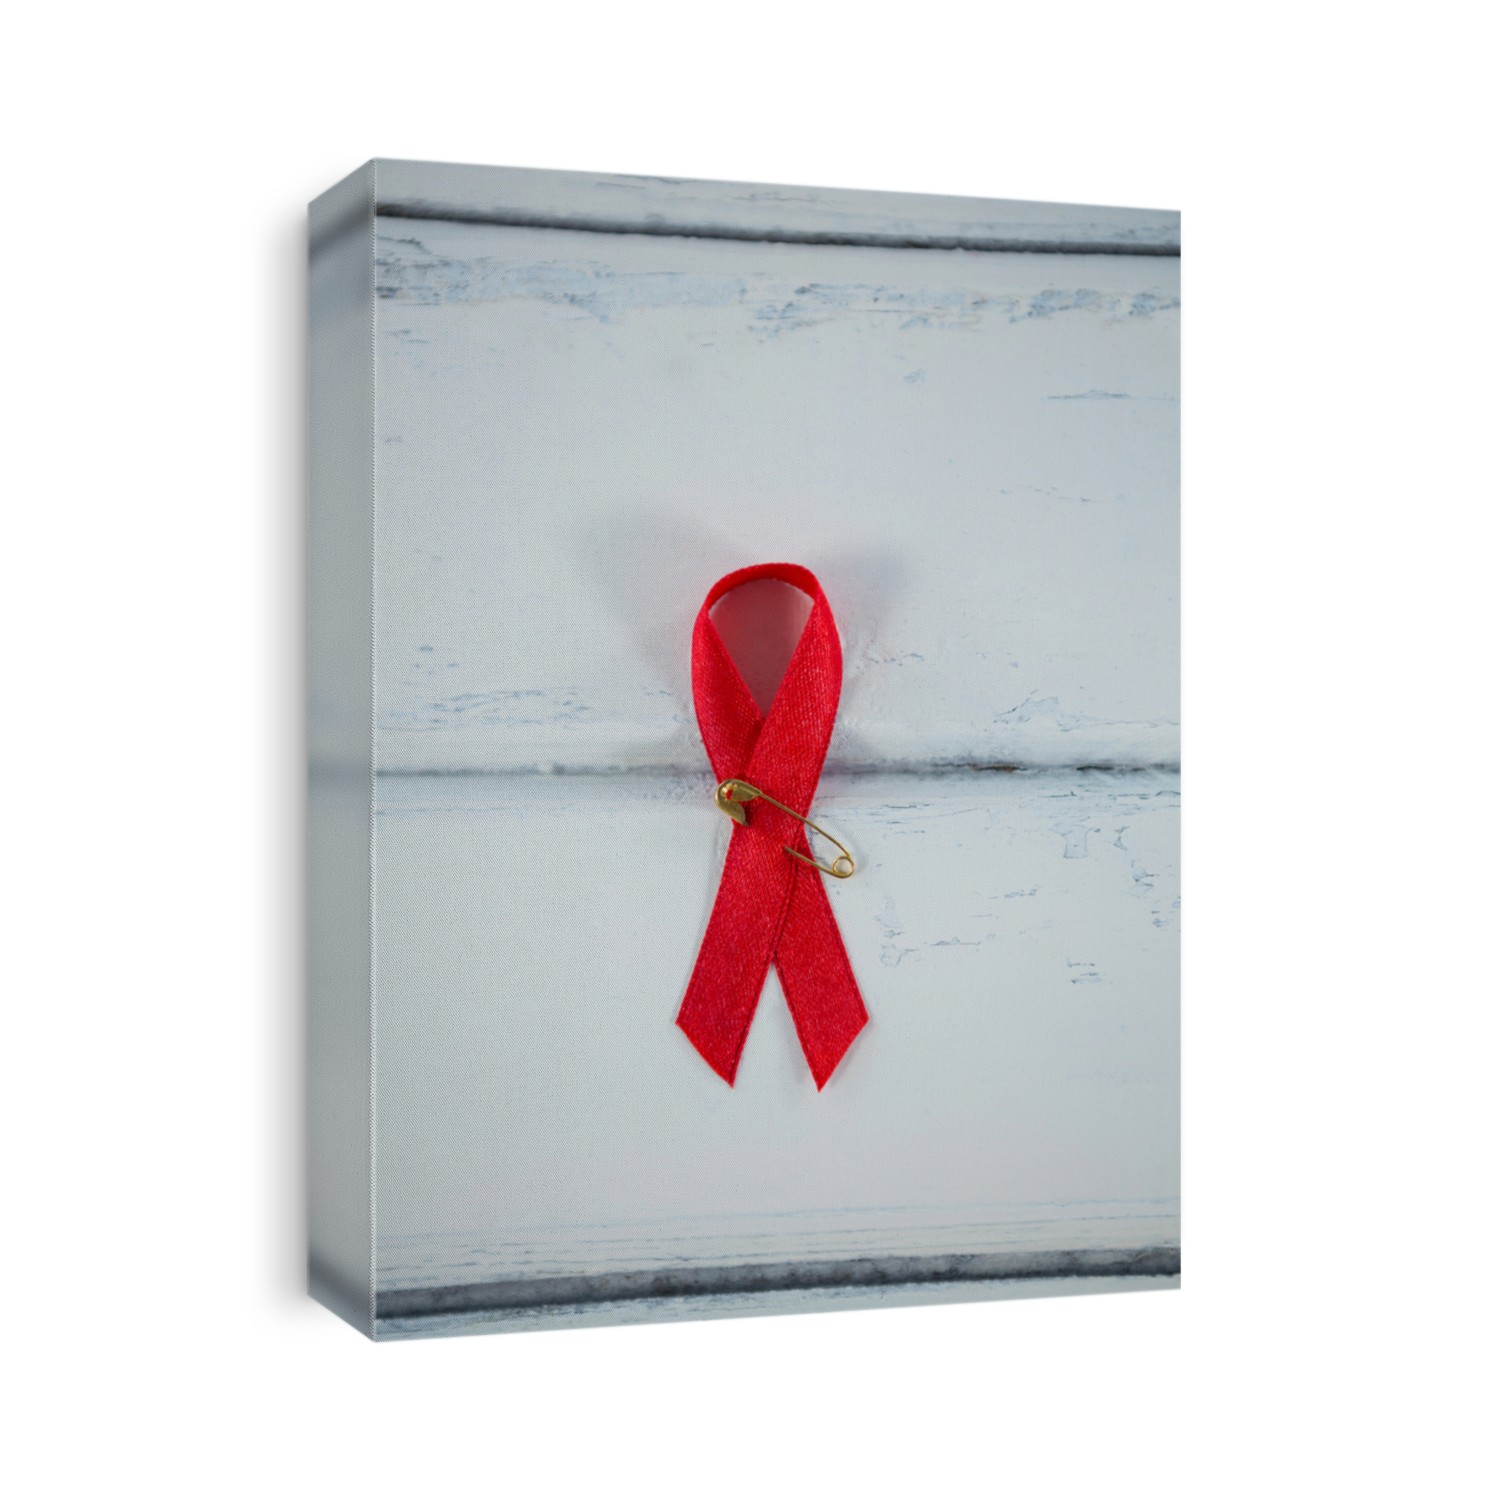 Overhead view of red AIDS awareness ribbon on white wooden table